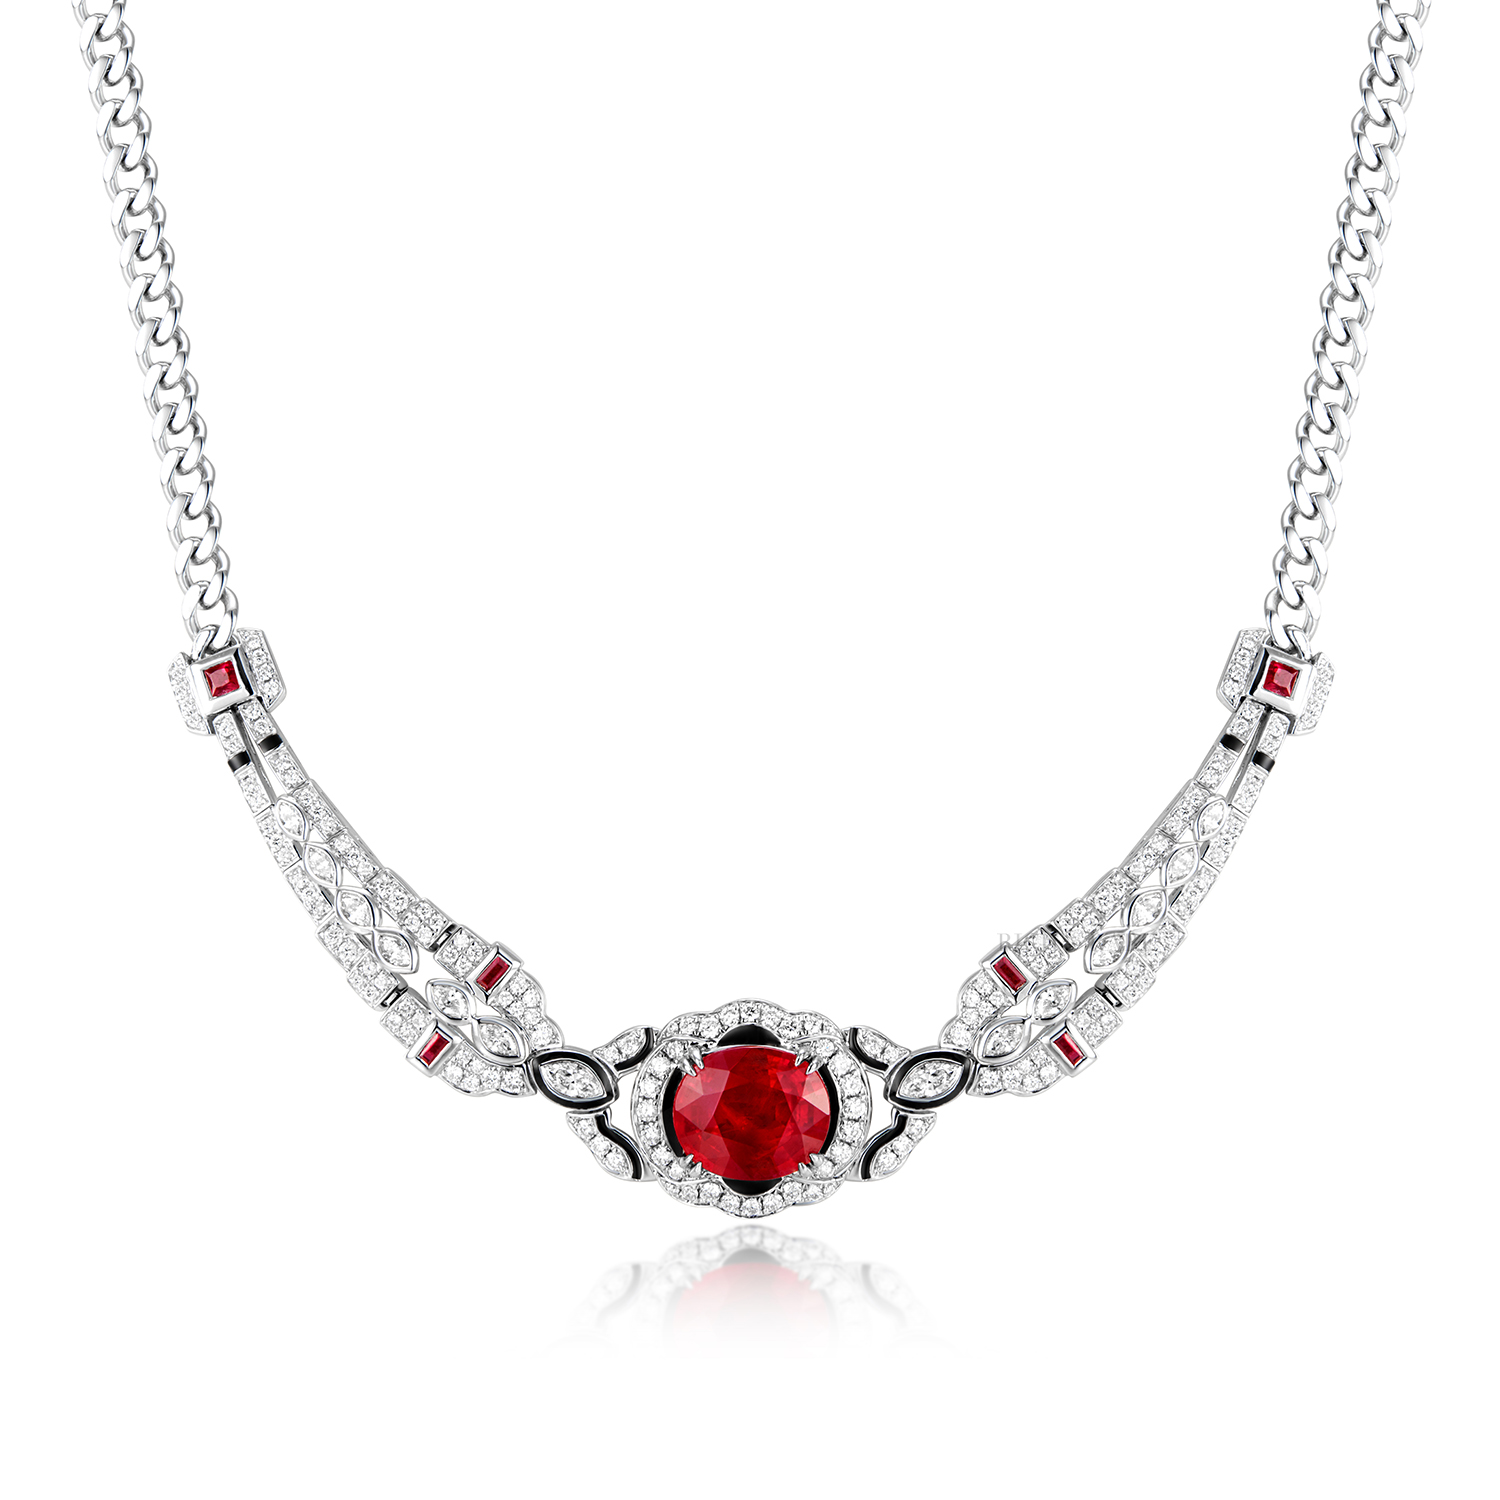 RUBY, ENAMEL AND DIAMOND NECKLACE